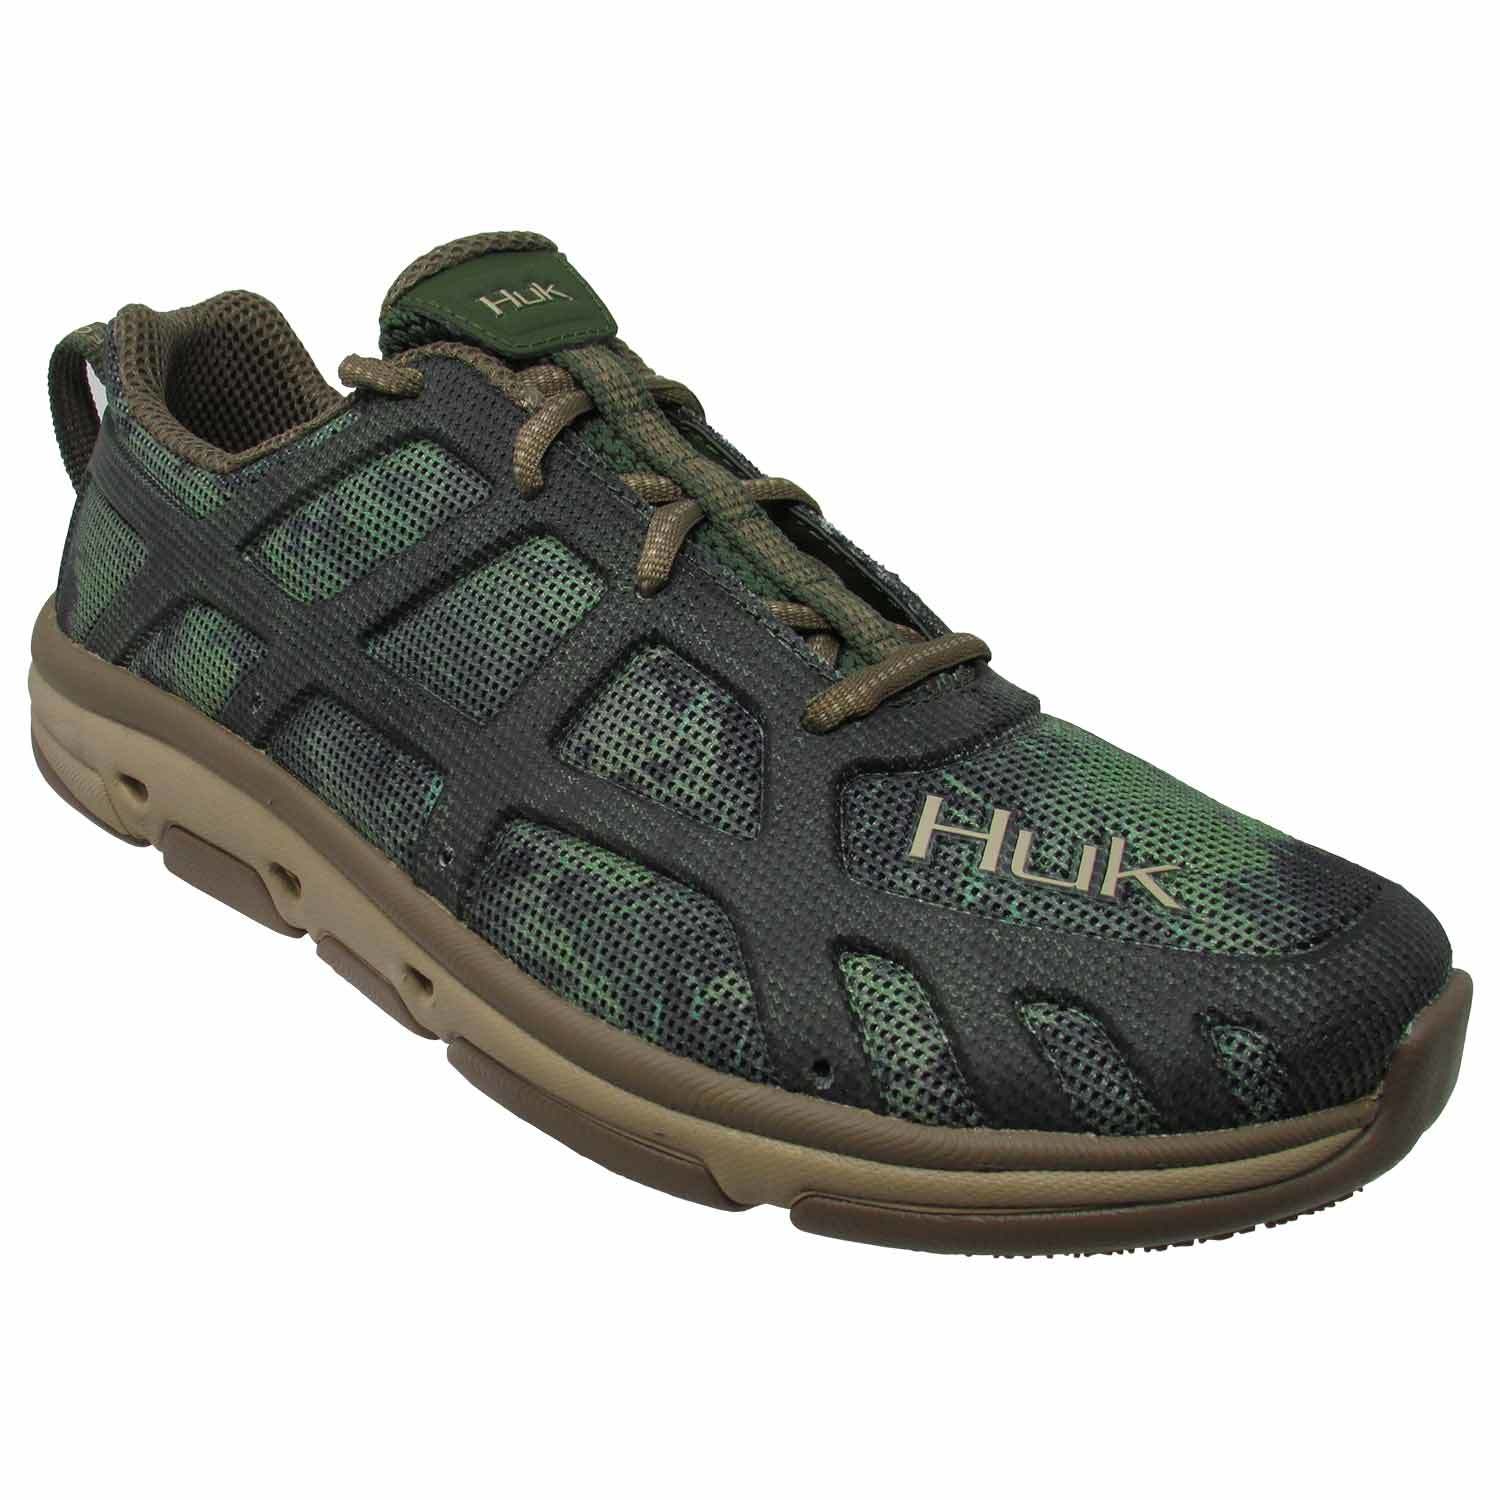 Men's Attack Fishing Shoes